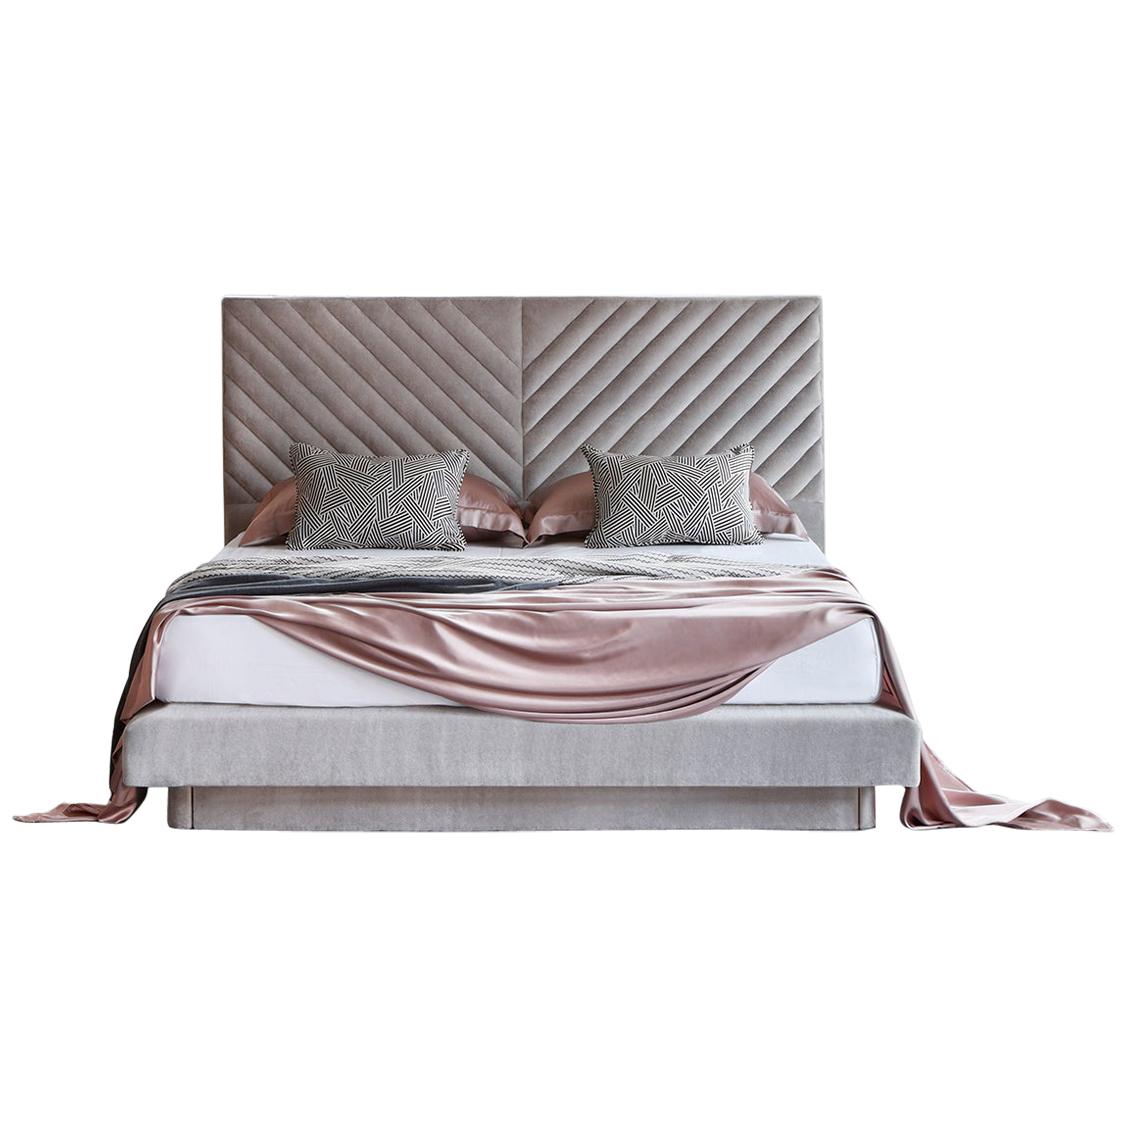 Bespoke Stella Headboard and Nº4 Bed Set, California King Size, by Nicole Fuller For Sale